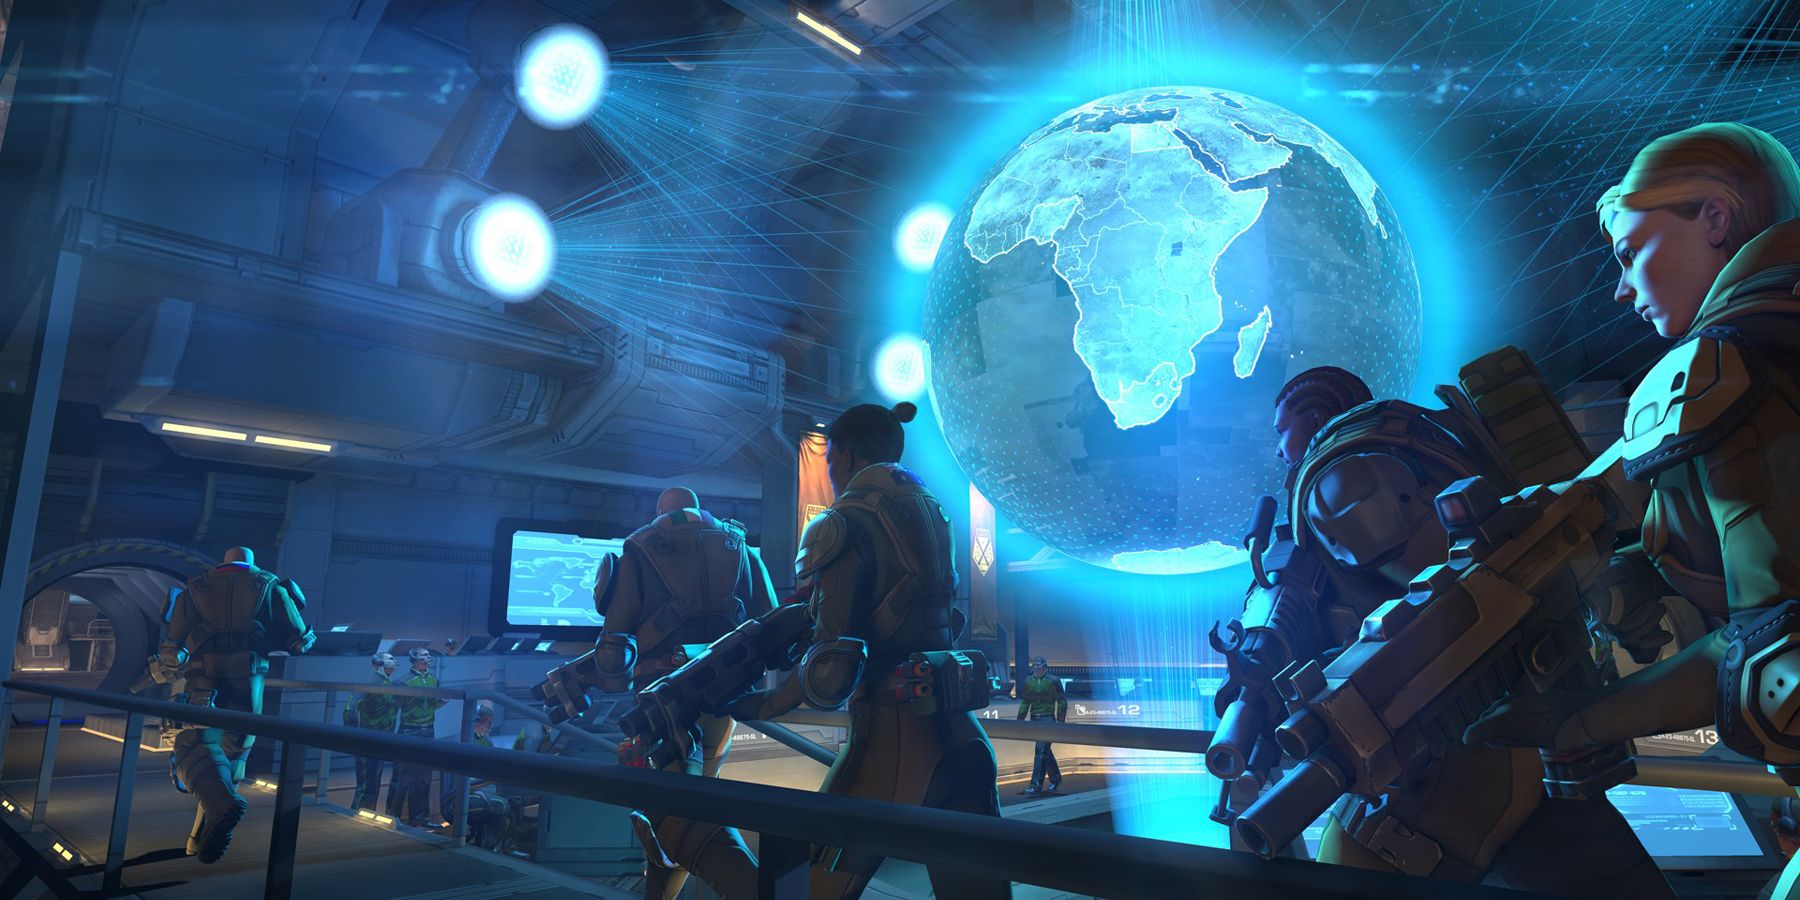 XCOM: Enemy Unknown soldiers in front of the Geoscape